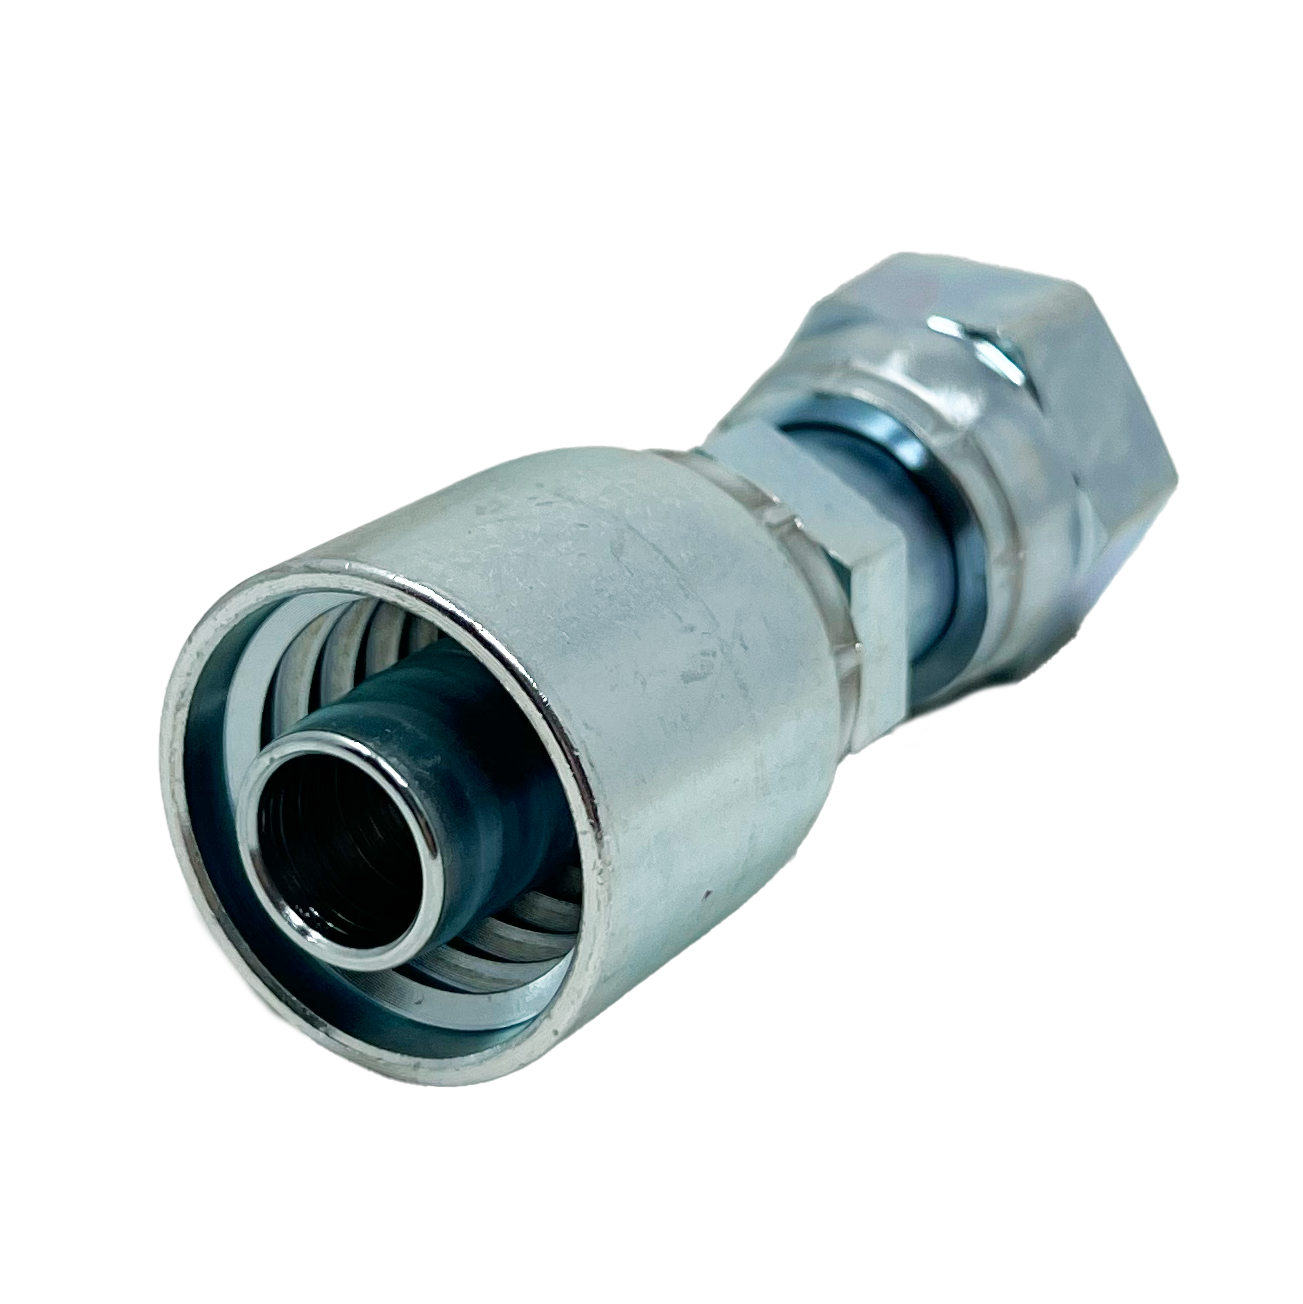 B2-OFFX-1012: Continental Hose Fitting, 0.625 (5/8") Hose ID x 1-3/16-12 Female ORFS, Straight Swivel Connection